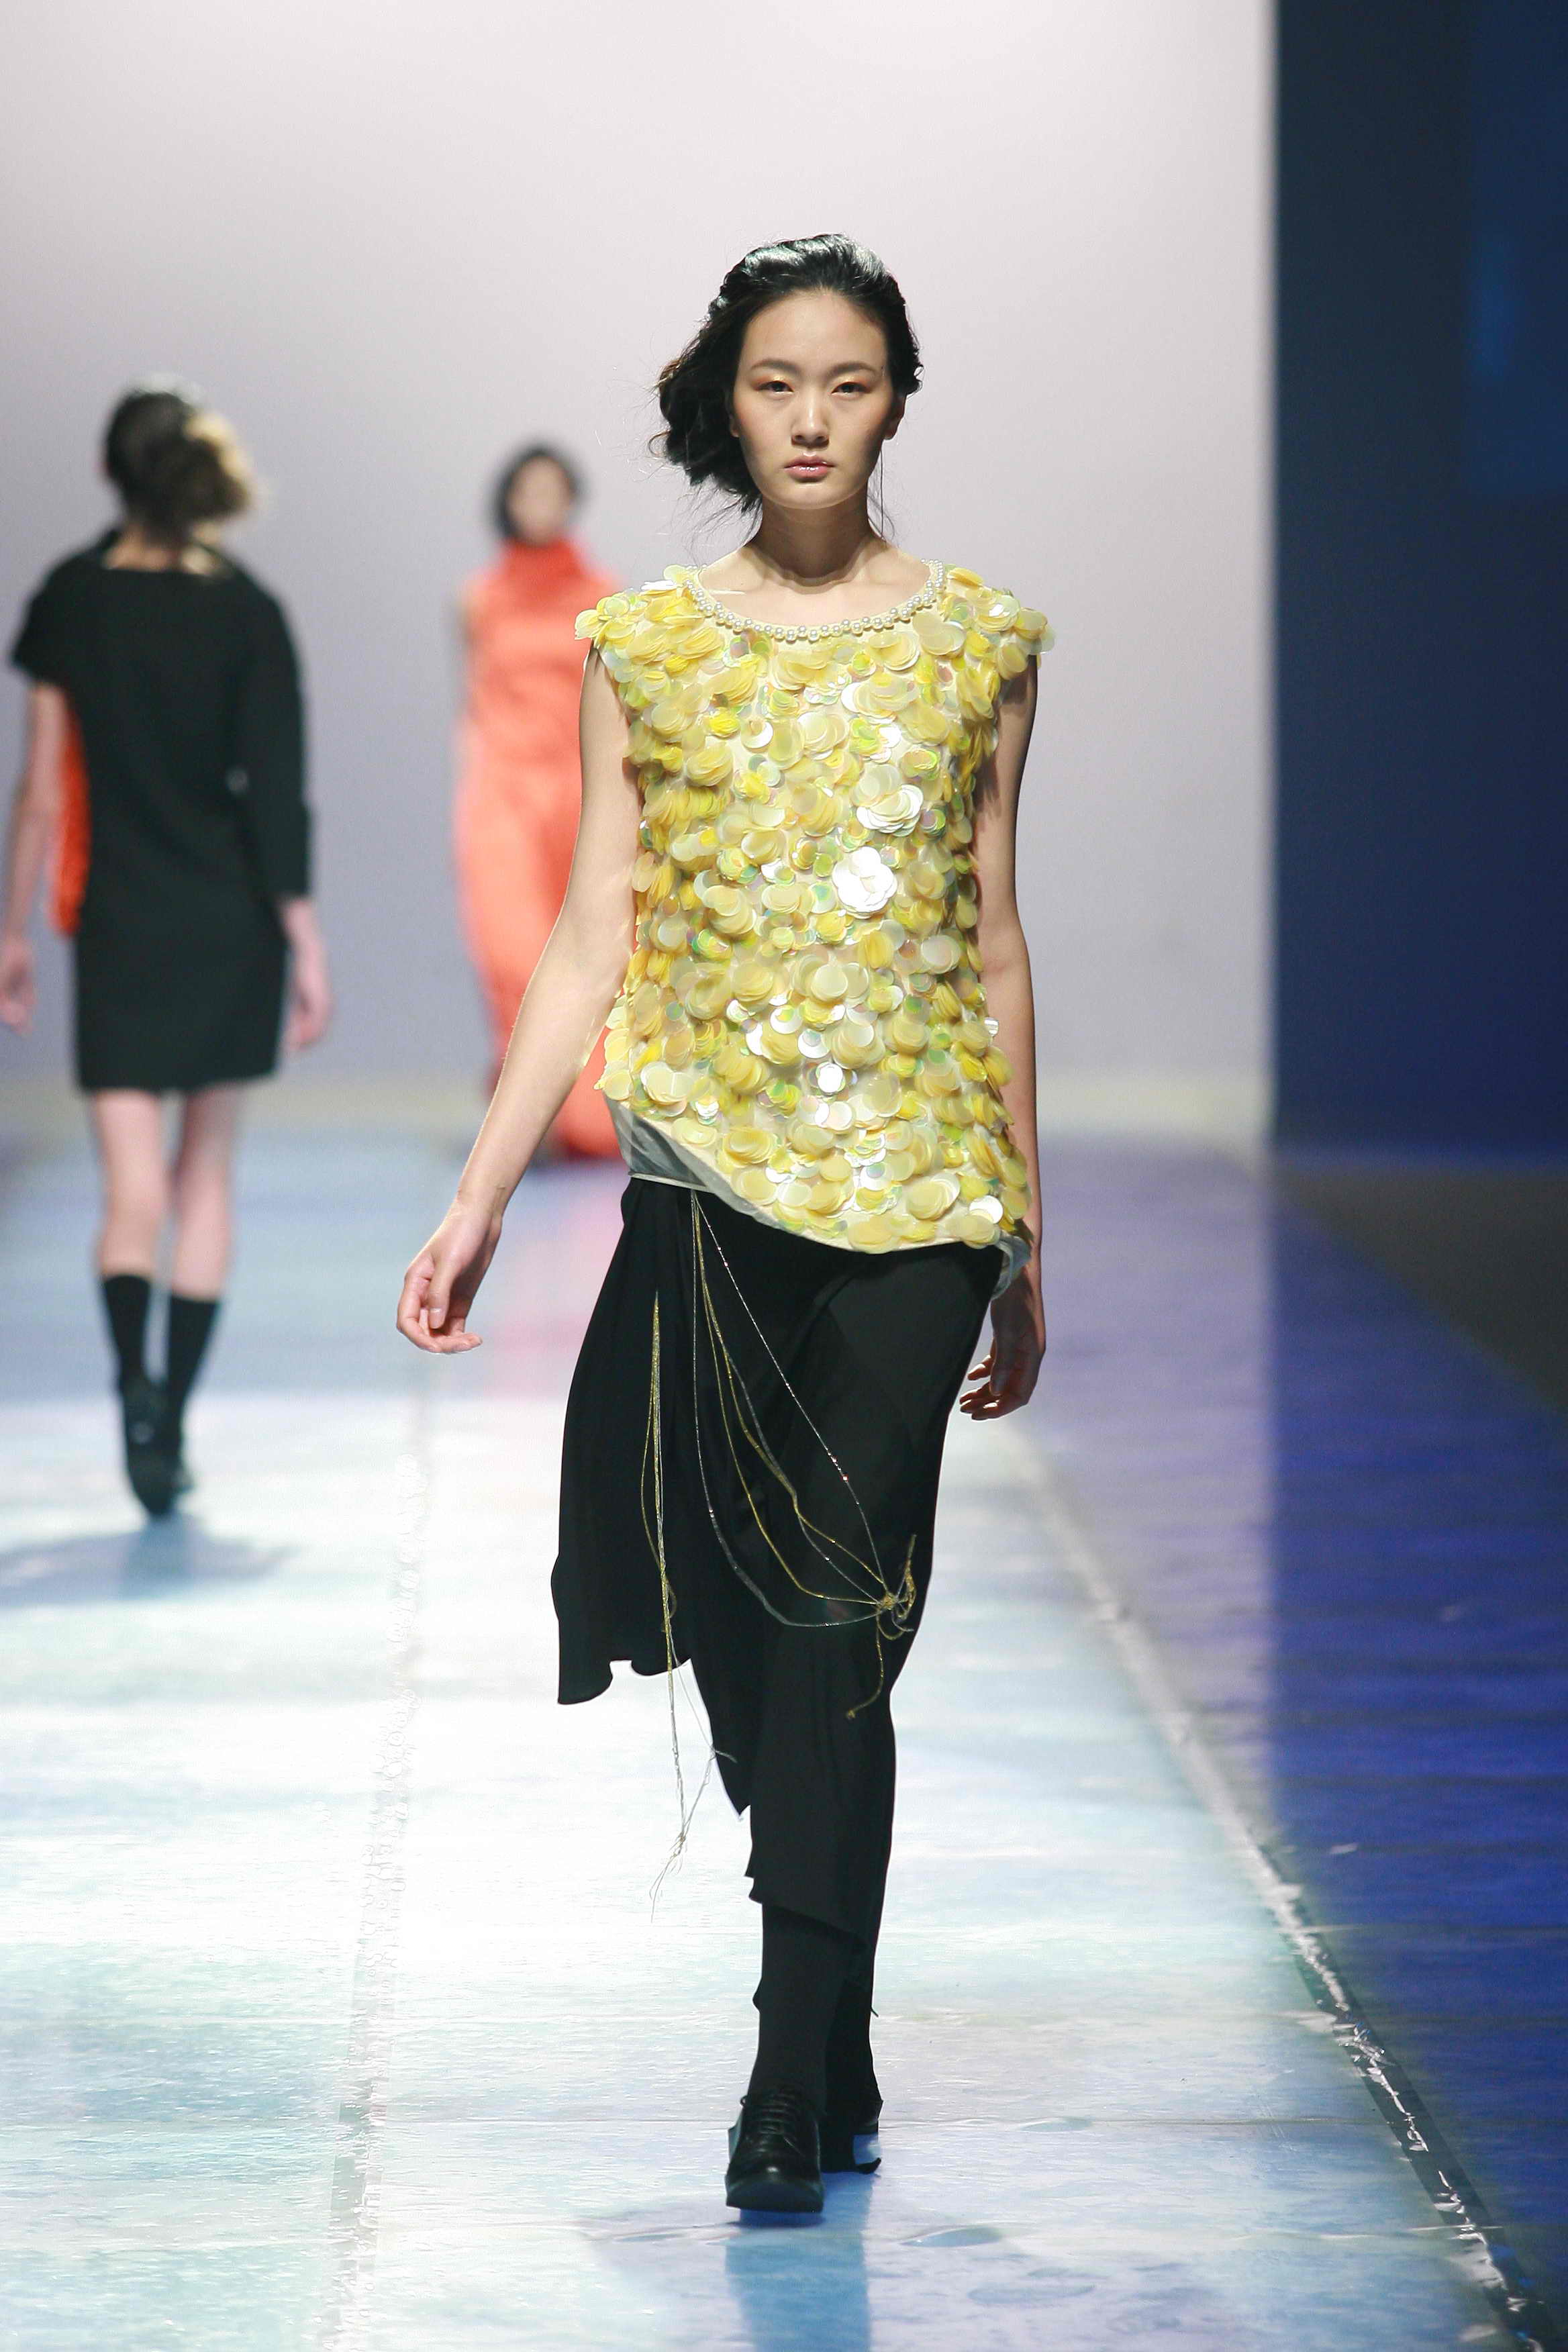 HKTDC Stages Style Hong Kong Fashion Show in Shanghai | HKTDC Media Room